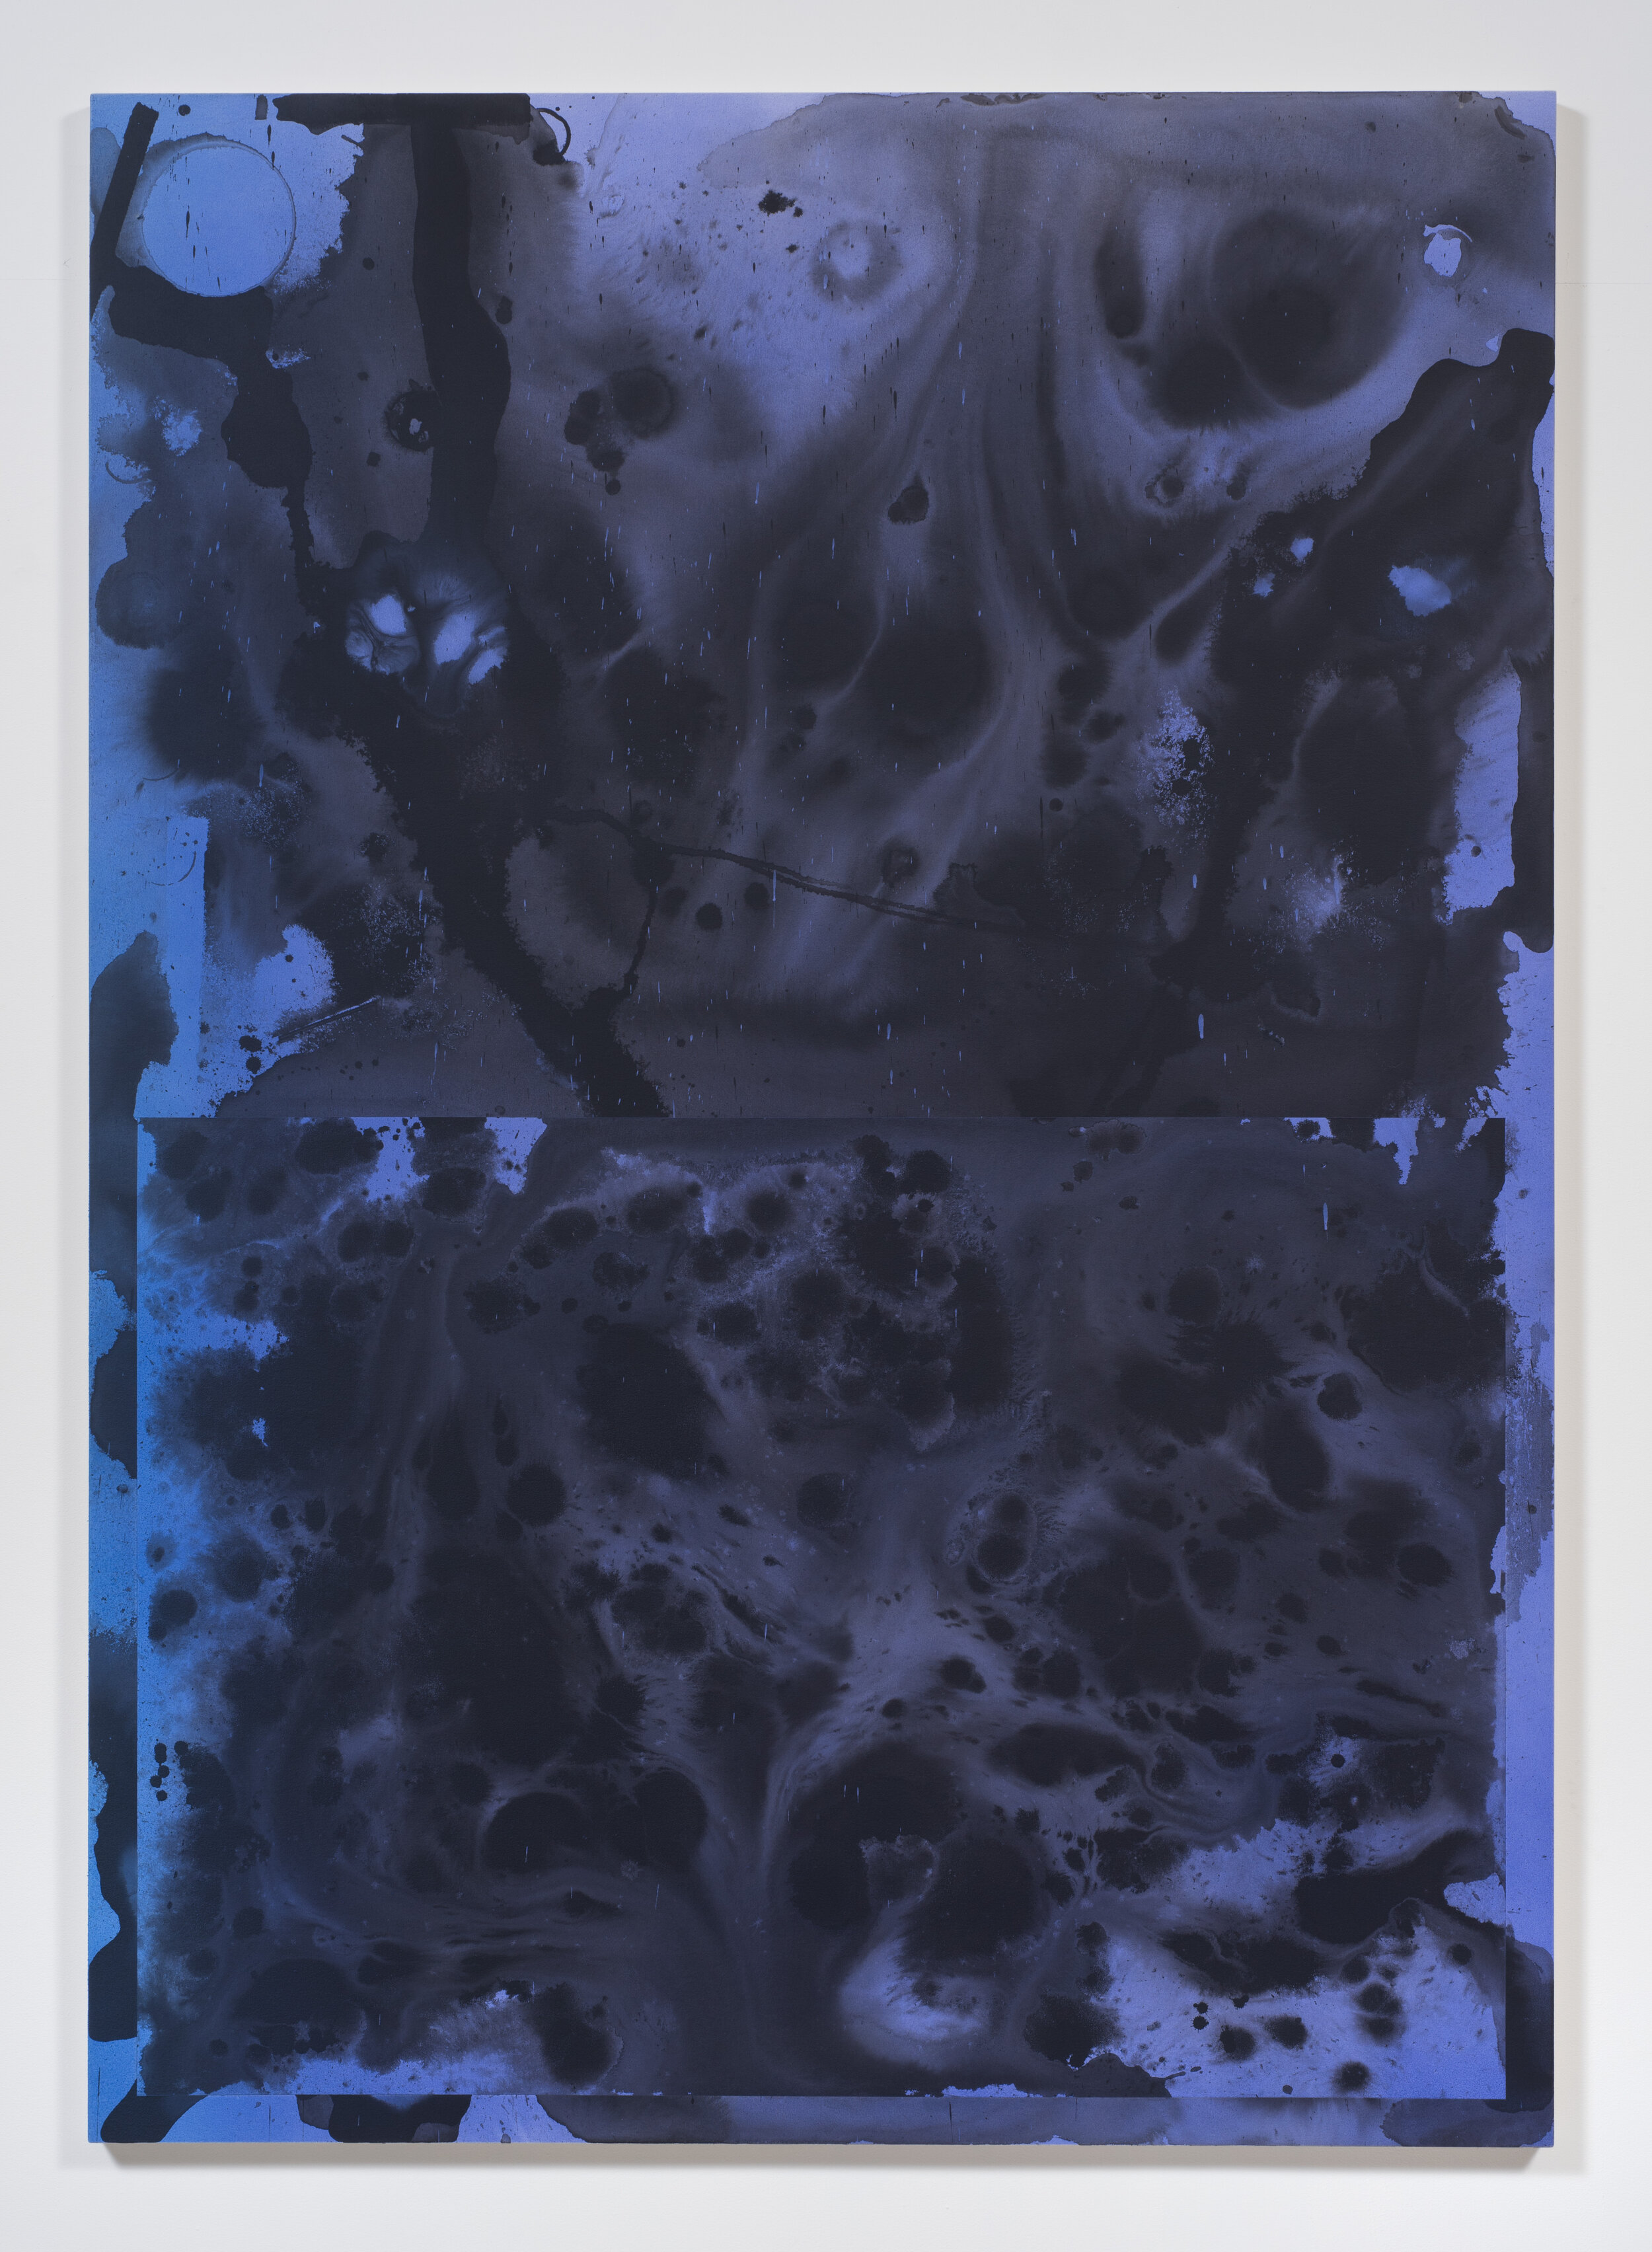   Untitled Painting in Cerulean over Violet,  2014. Acrylic on canvas. 84 x 60 inches 